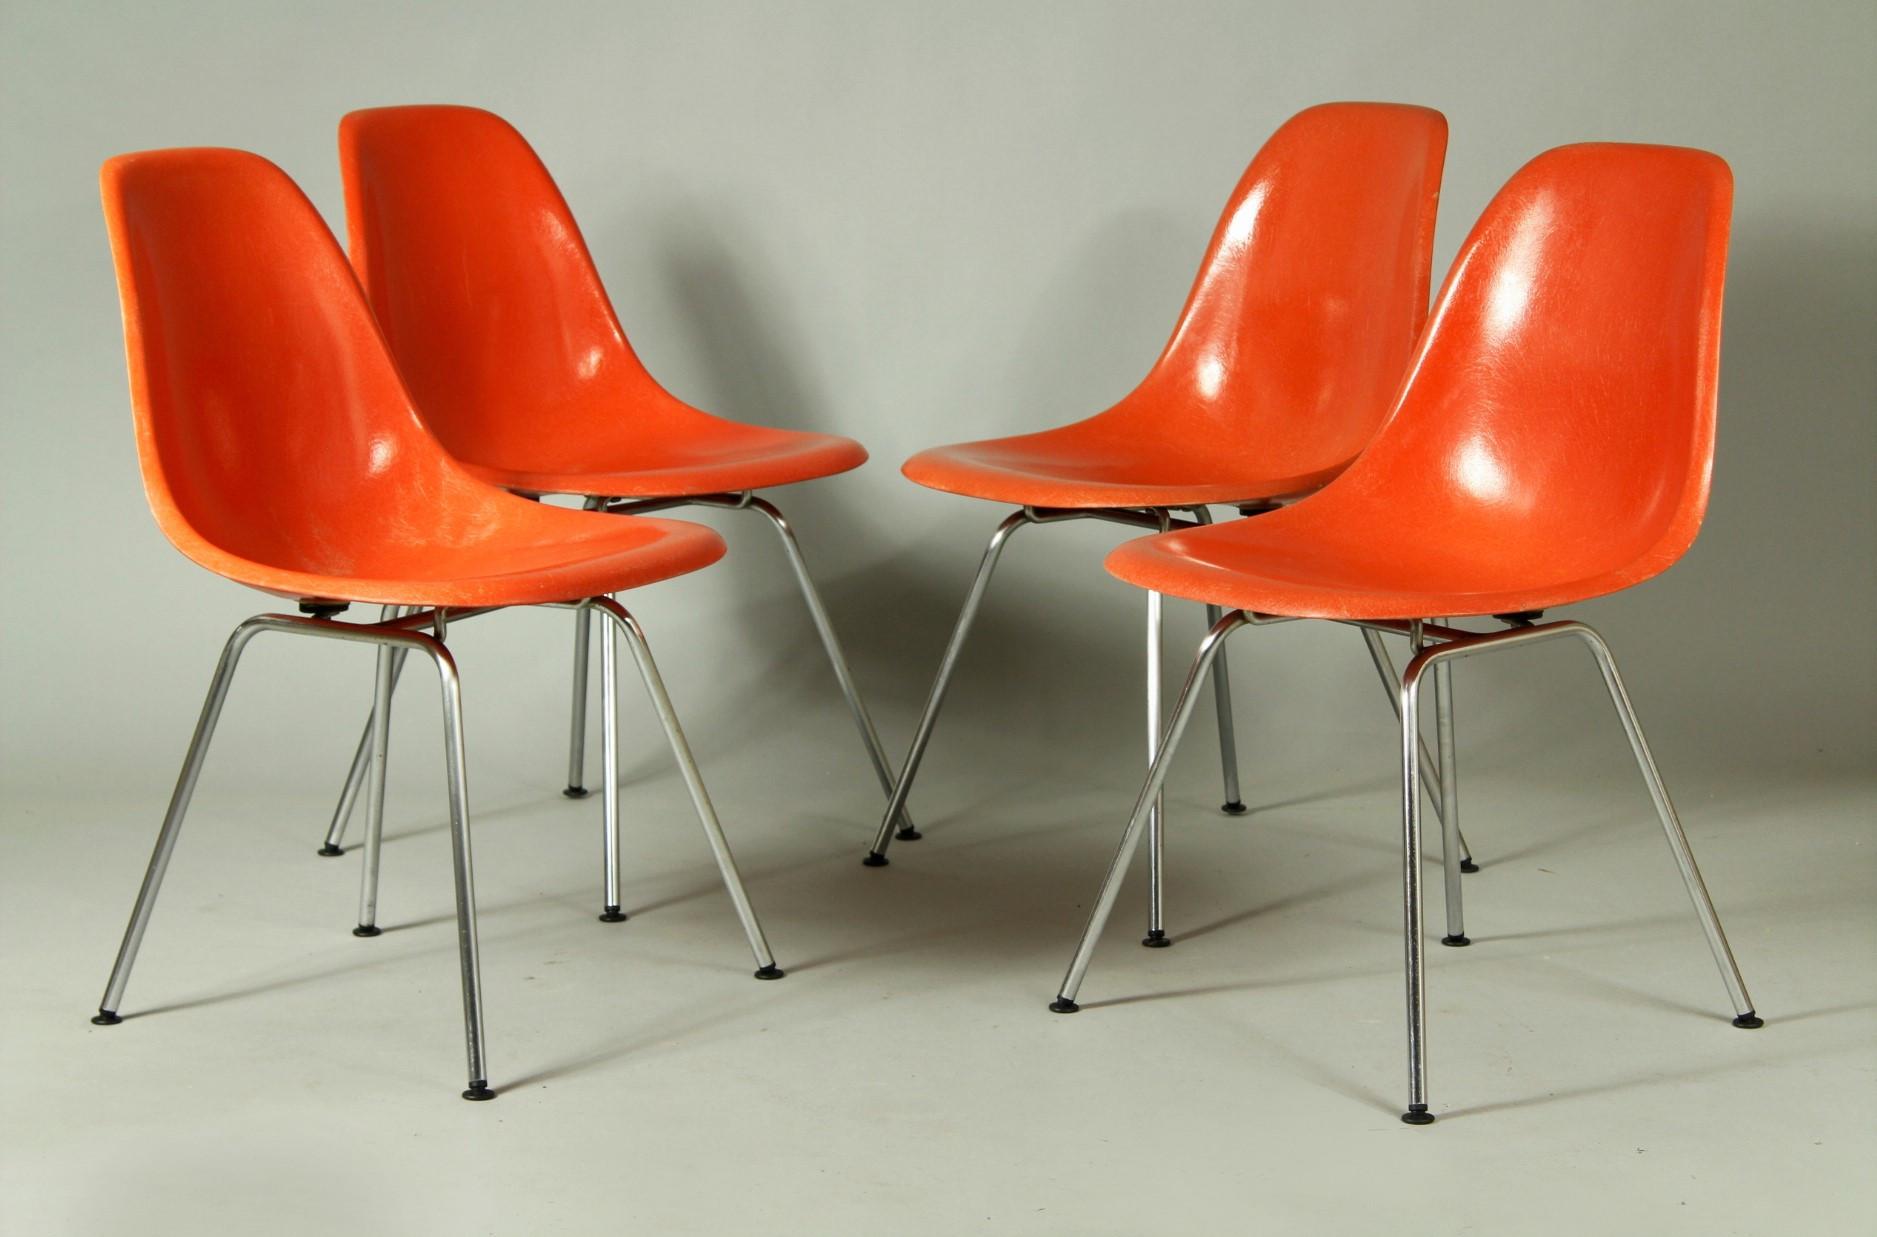 Vintage 1950s orange fiberglass dining shell chairs designed by Charles and Ray Eames for Herman Miller. Each shell is marked with Herman Miller M stamp, this stamp was used in 1958 and 1959. These chairs are in very good original